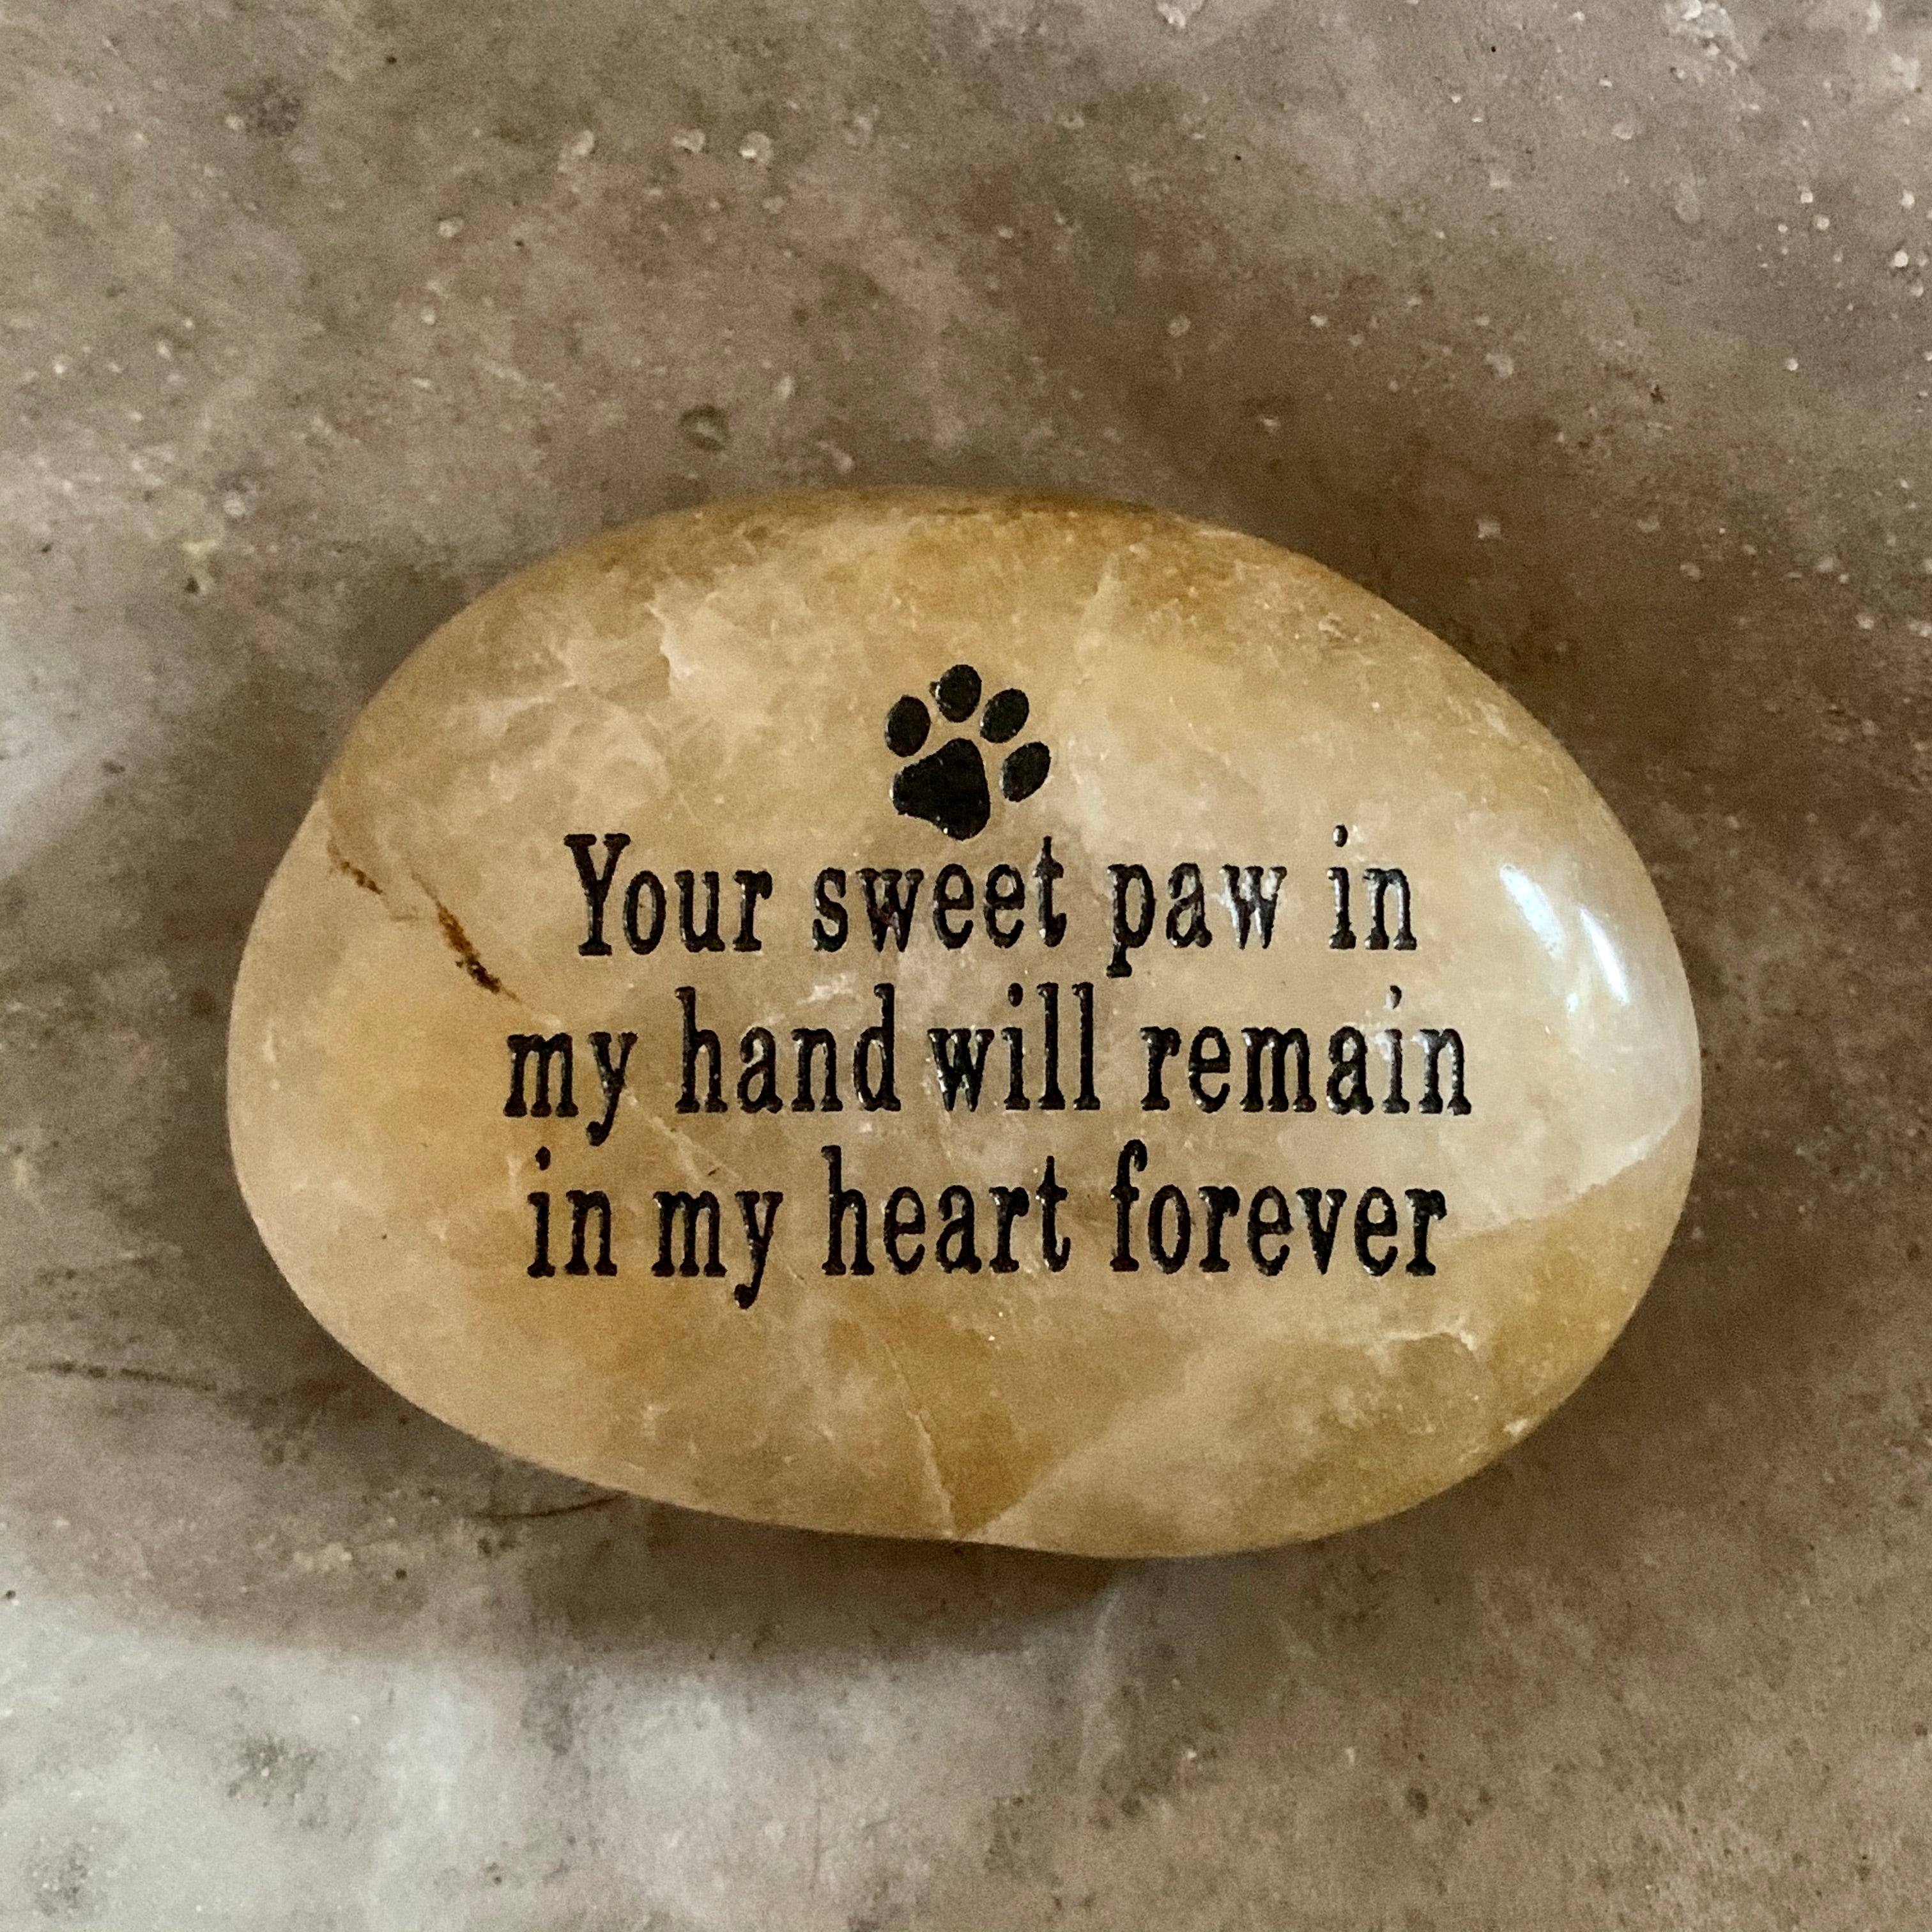 Your Sweet Paw In My Hand Will Remain In My Heart Forever ~ Engraved Inspirational Rock